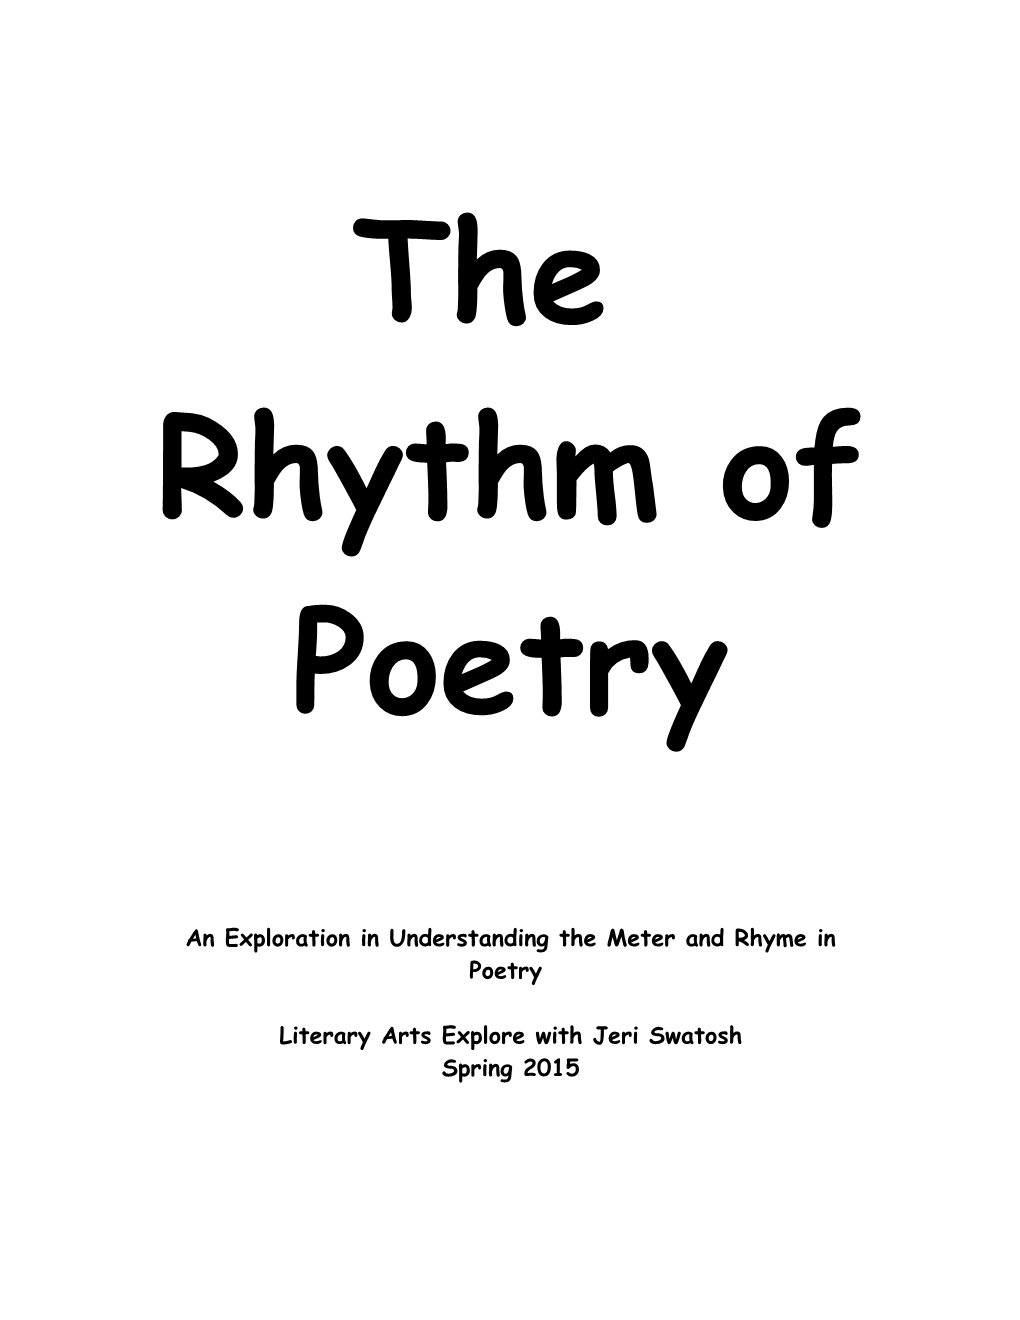 An Exploration in Understanding the Meter and Rhyme in Poetry